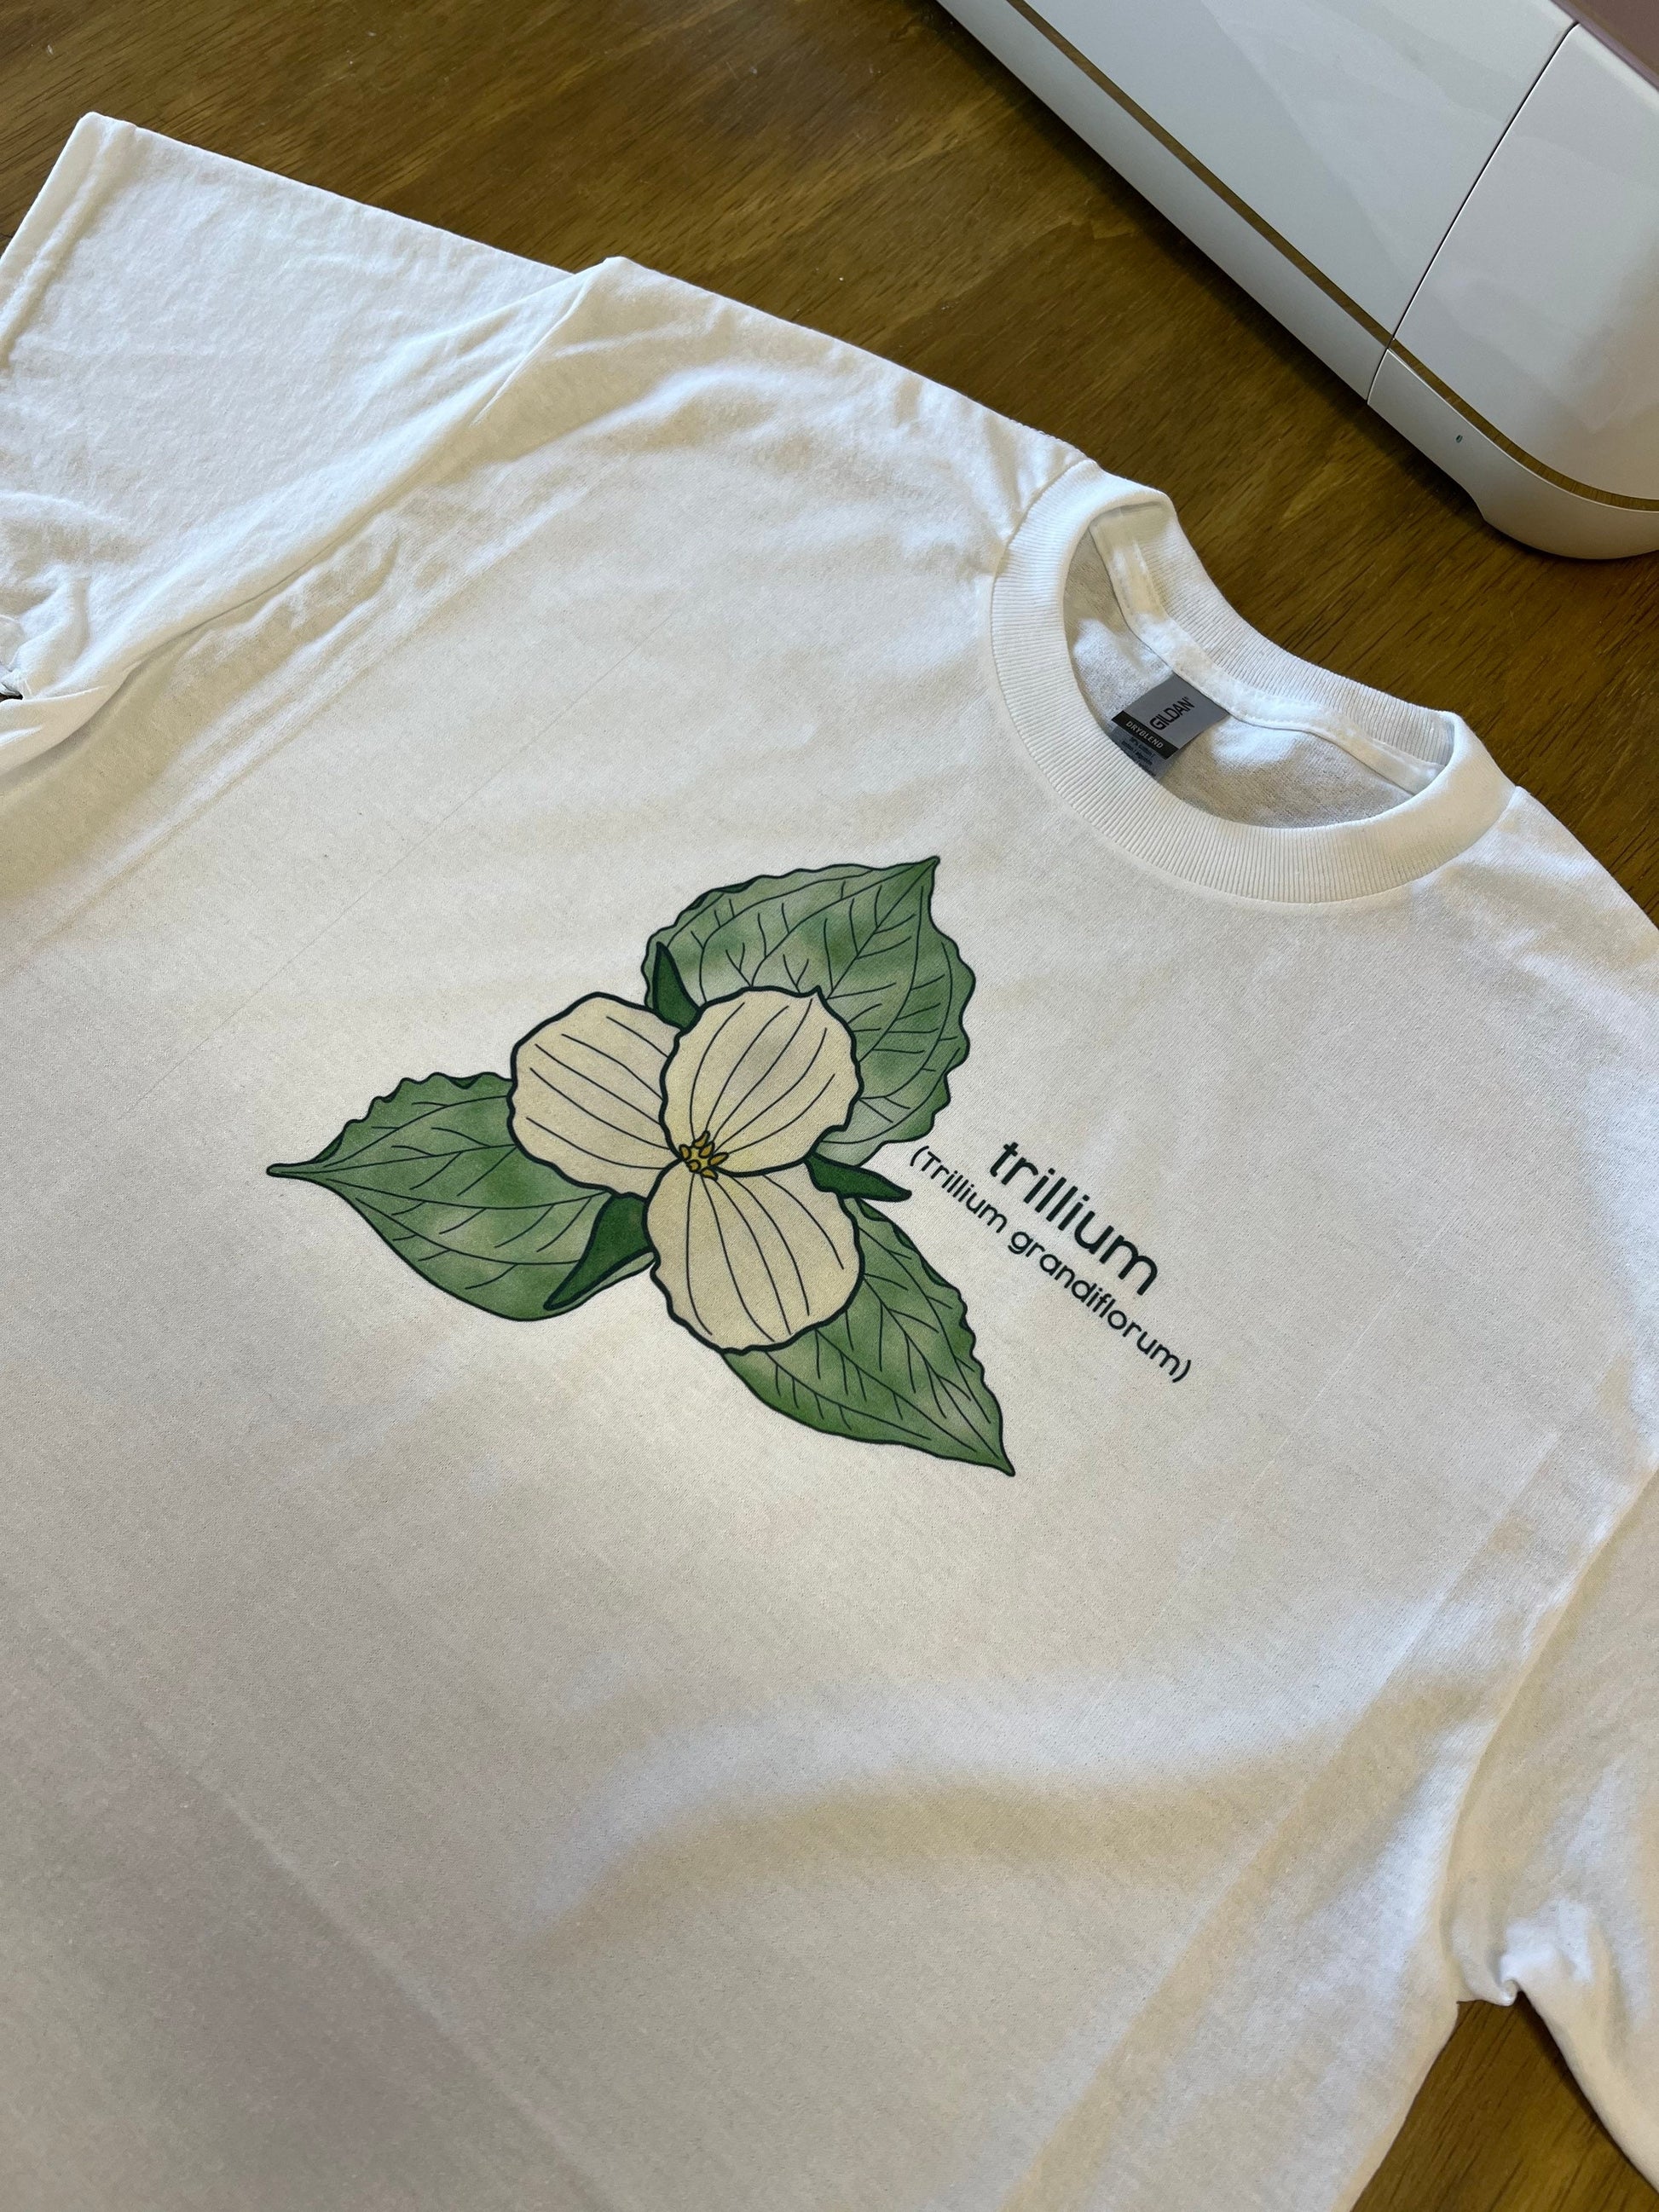 Trillium - Historically Queer Flowers T Shirt - Botany Floral